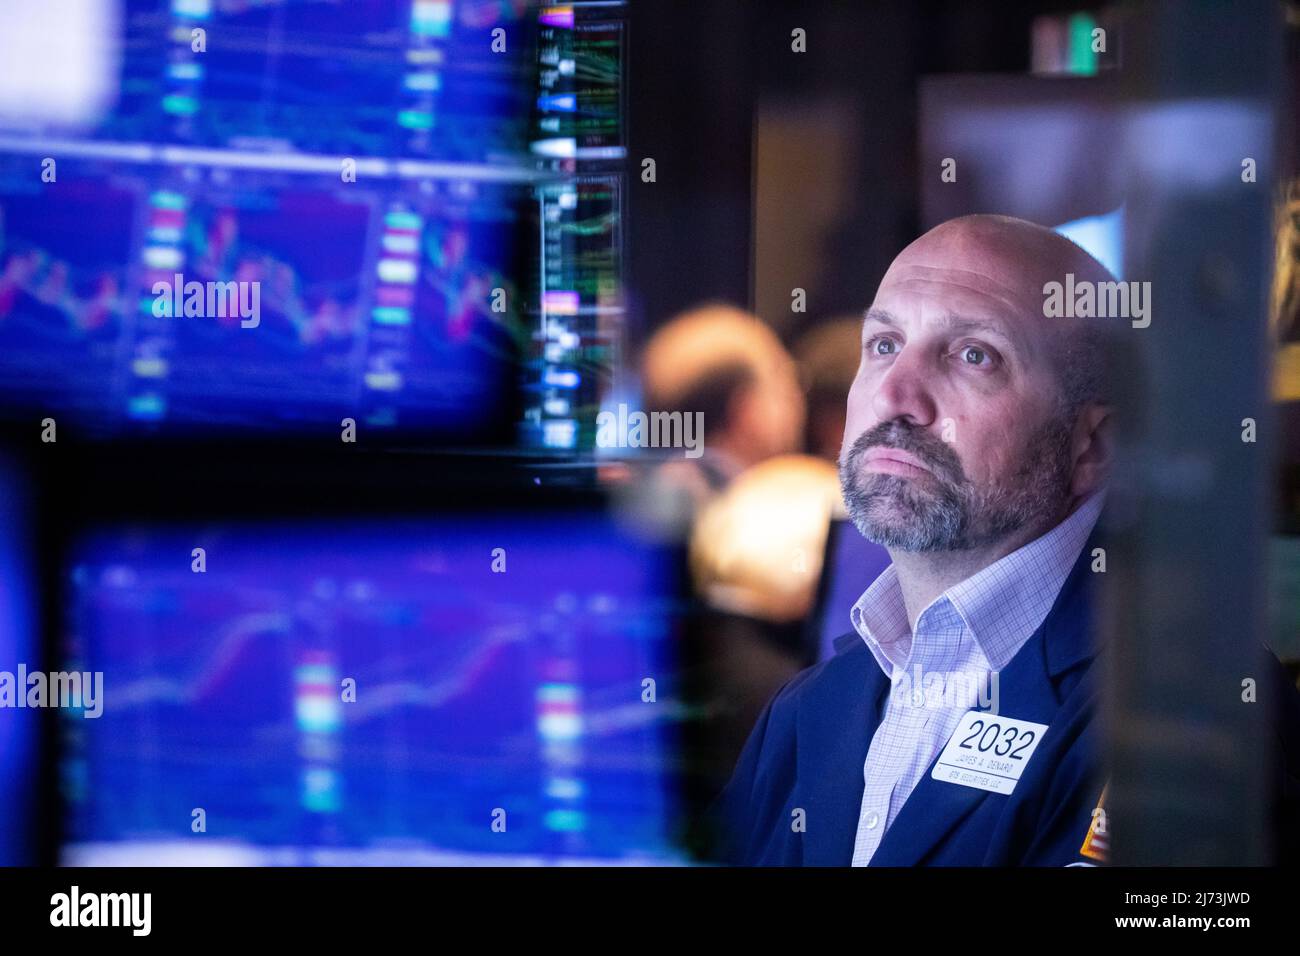 (220506) -- NEW YORK, May 6, 2022 (Xinhua) -- A trader works on the floor of the New York Stock Exchange (NYSE) in New York, the United States, May 5, 2022. U.S. stocks plunged on Thursday as heavy selling intensified on Wall Street.   The Dow Jones Industrial Average tumbled 1063.09 points, or 3.12 percent, to 32,997.97. The S&P 500 fell 153.30 points, or 3.56 percent, to 4,146.87. The Nasdaq Composite Index shed 647.17 points, or 4.99 percent, to 12,317.69. (Photo by Michael Nagle/Xinhua) Stock Photo